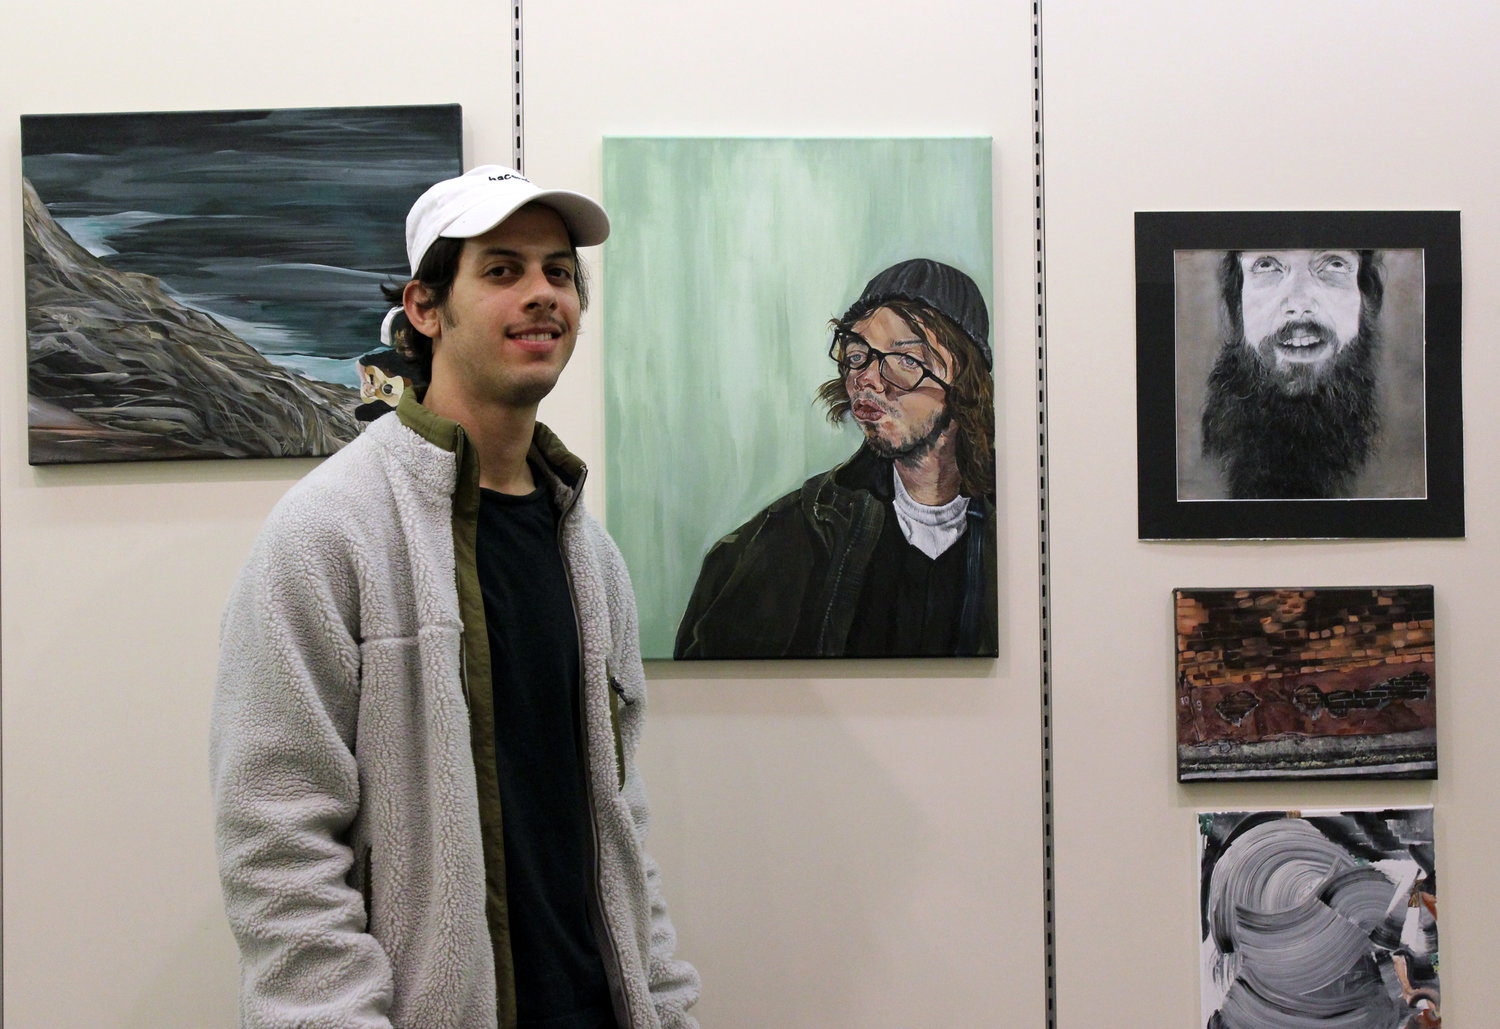 Andrew Albarracin, 27, of Massapequa Park, above was also featured in the show. More than a dozen local artists were invited by the library to display their work and connect with other artists.